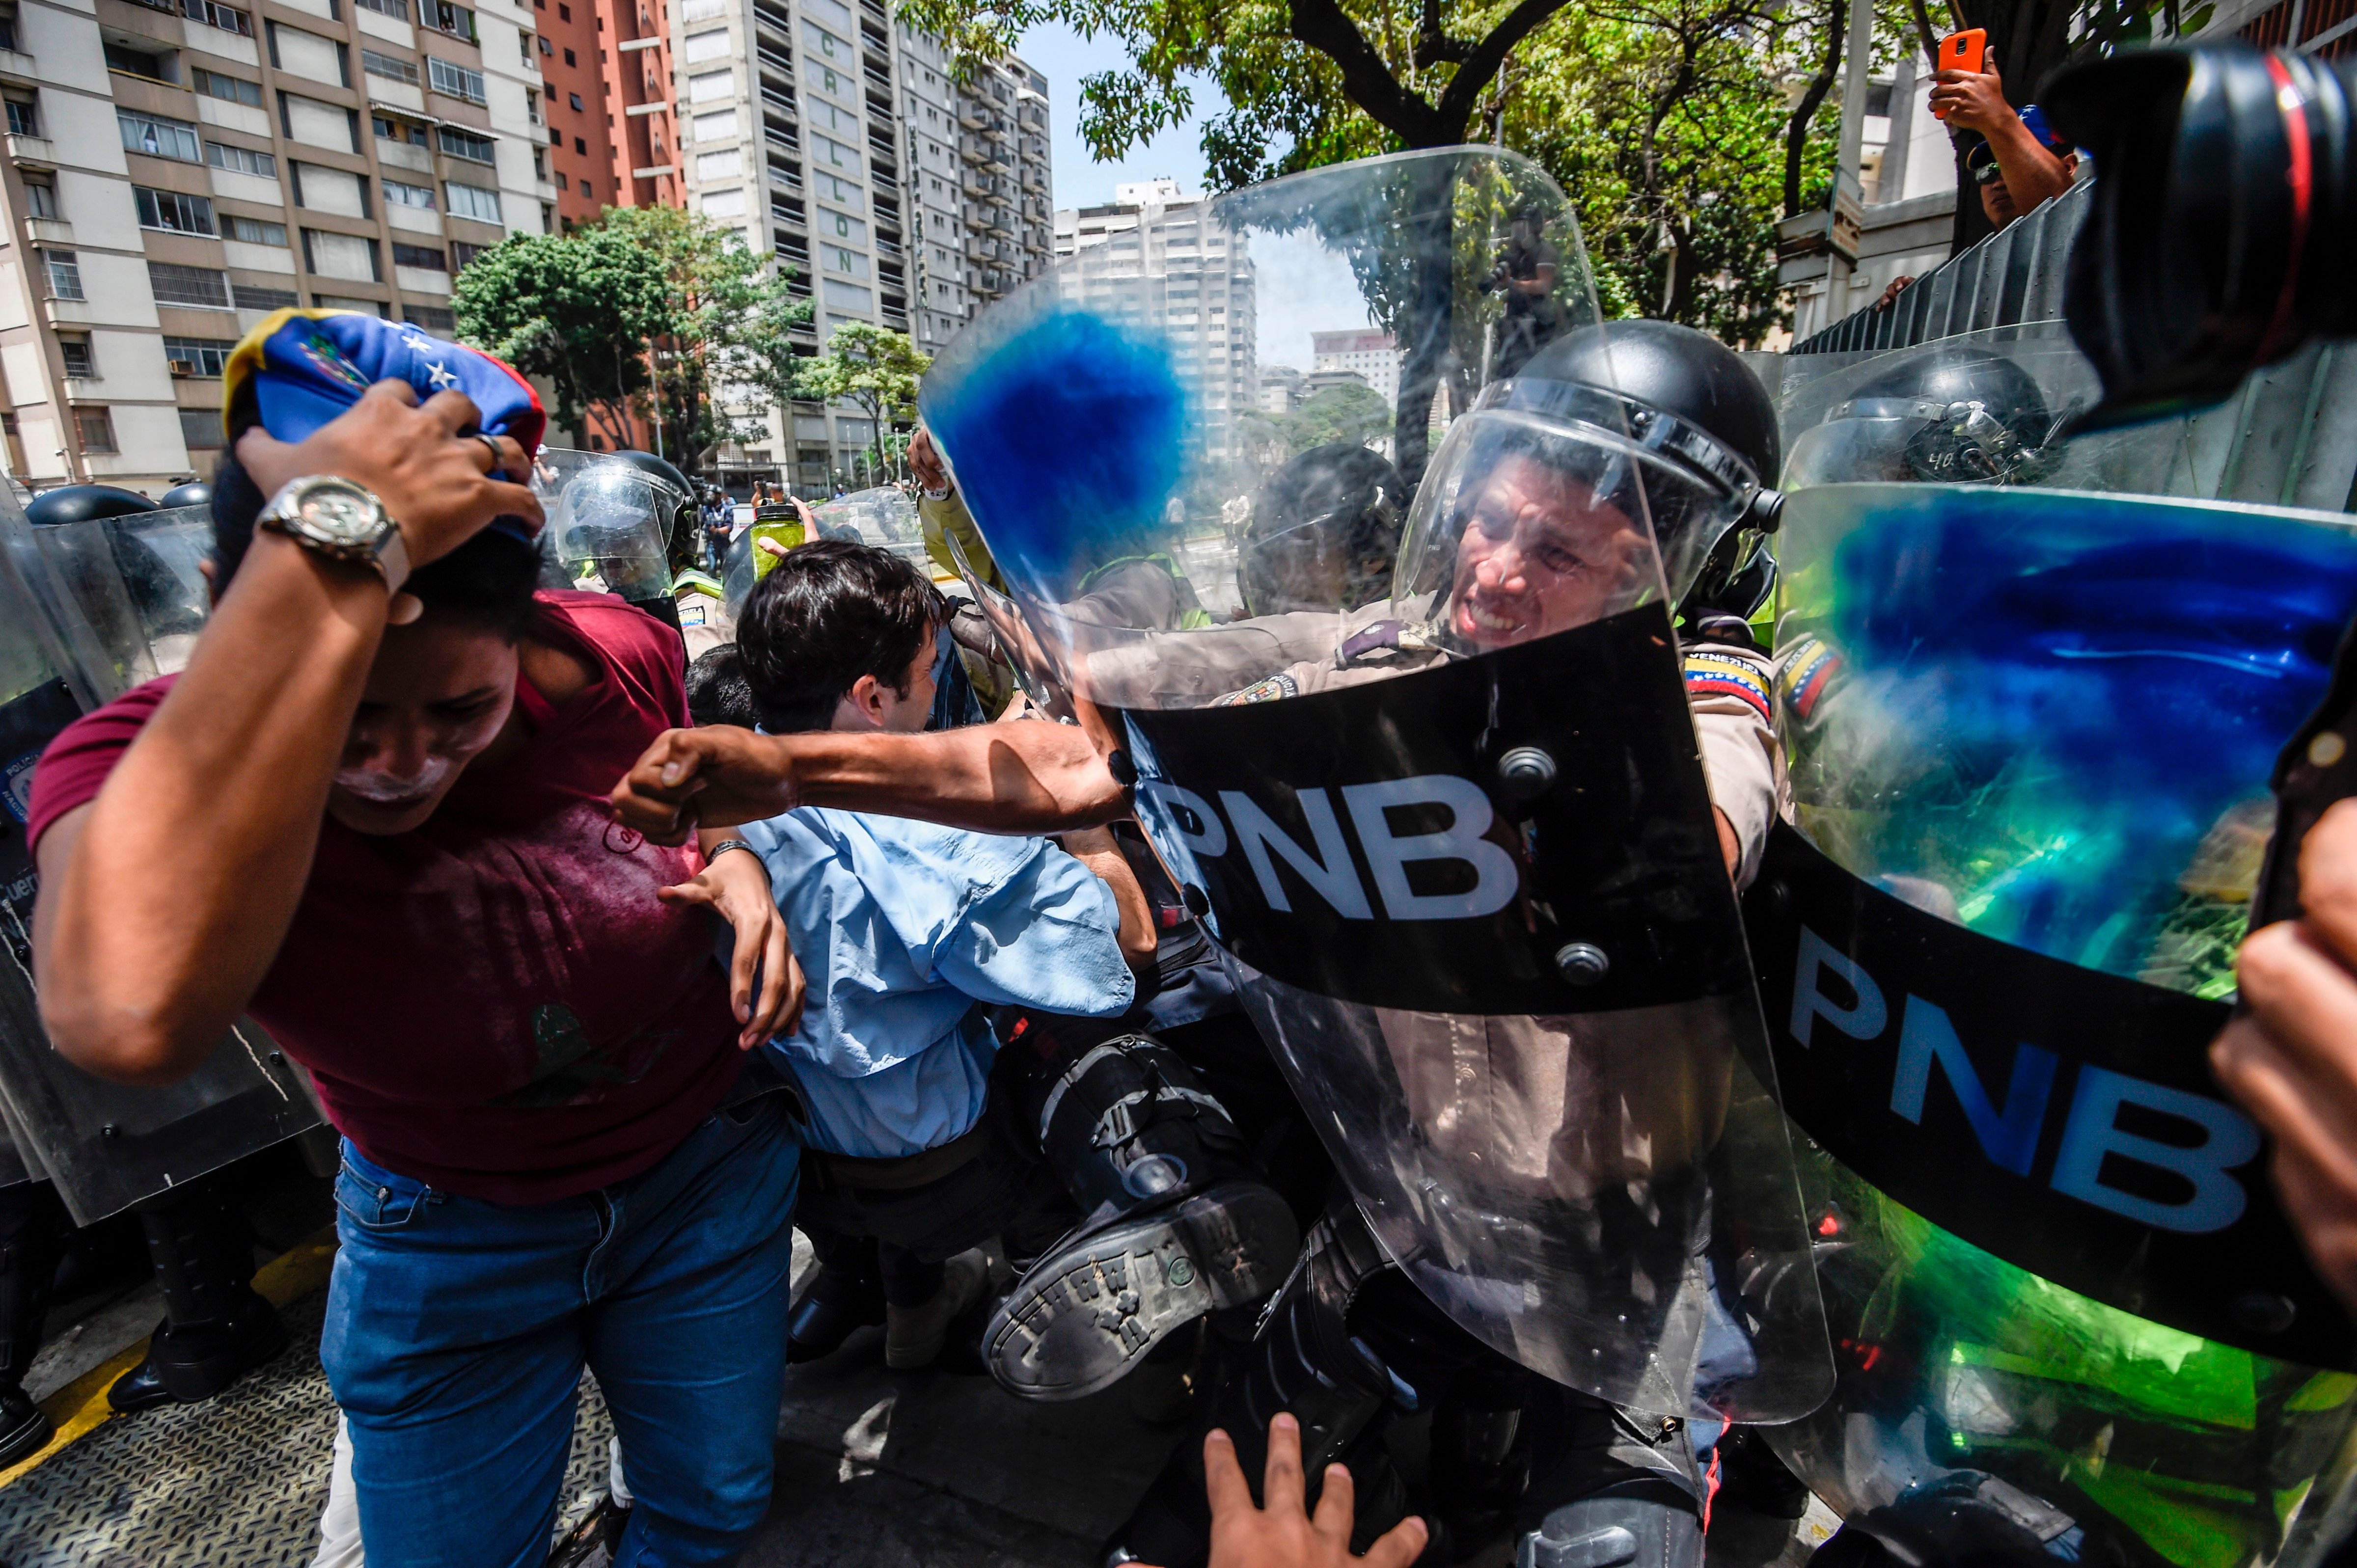 Venezuela's opposition activists scuffle with riot police during a protest against Nicolas Maduro's government in Caracas, Apr. 4, 2017. (Juan Barreto—AFP/Getty Images)